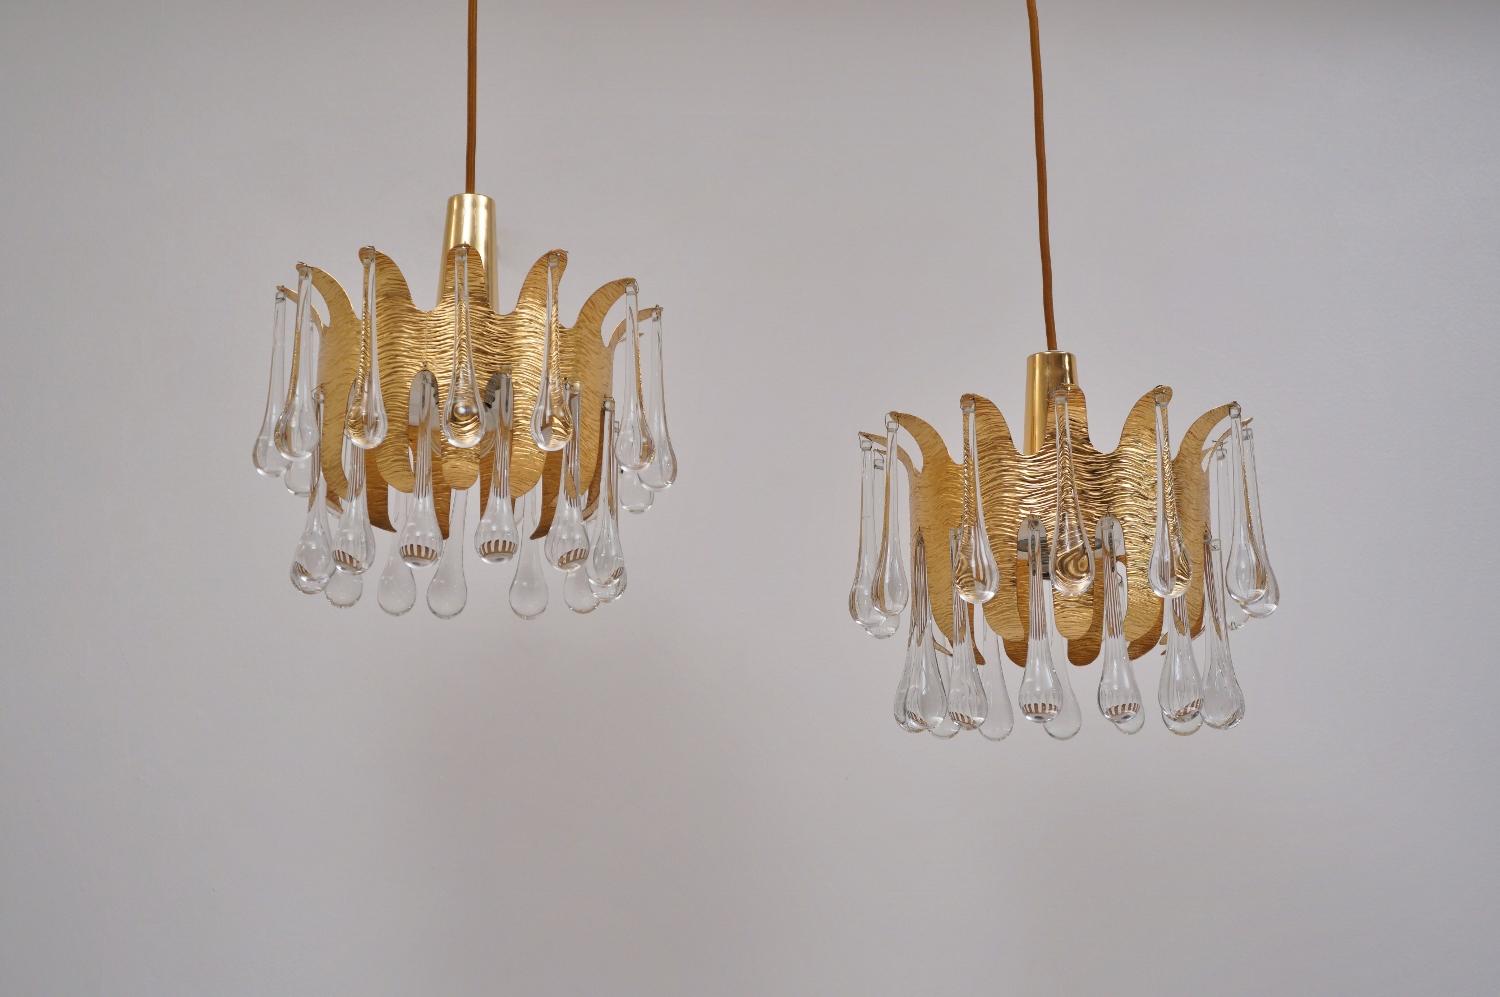 Ernst Palme pair pendants for Palwa, gilt brass and crystal, 1960s, German

Both lights have been thoroughly cleaned respecting the vintage patina. Newly rewired and earthed with gold silk cable, in full working order and ready to install. Light